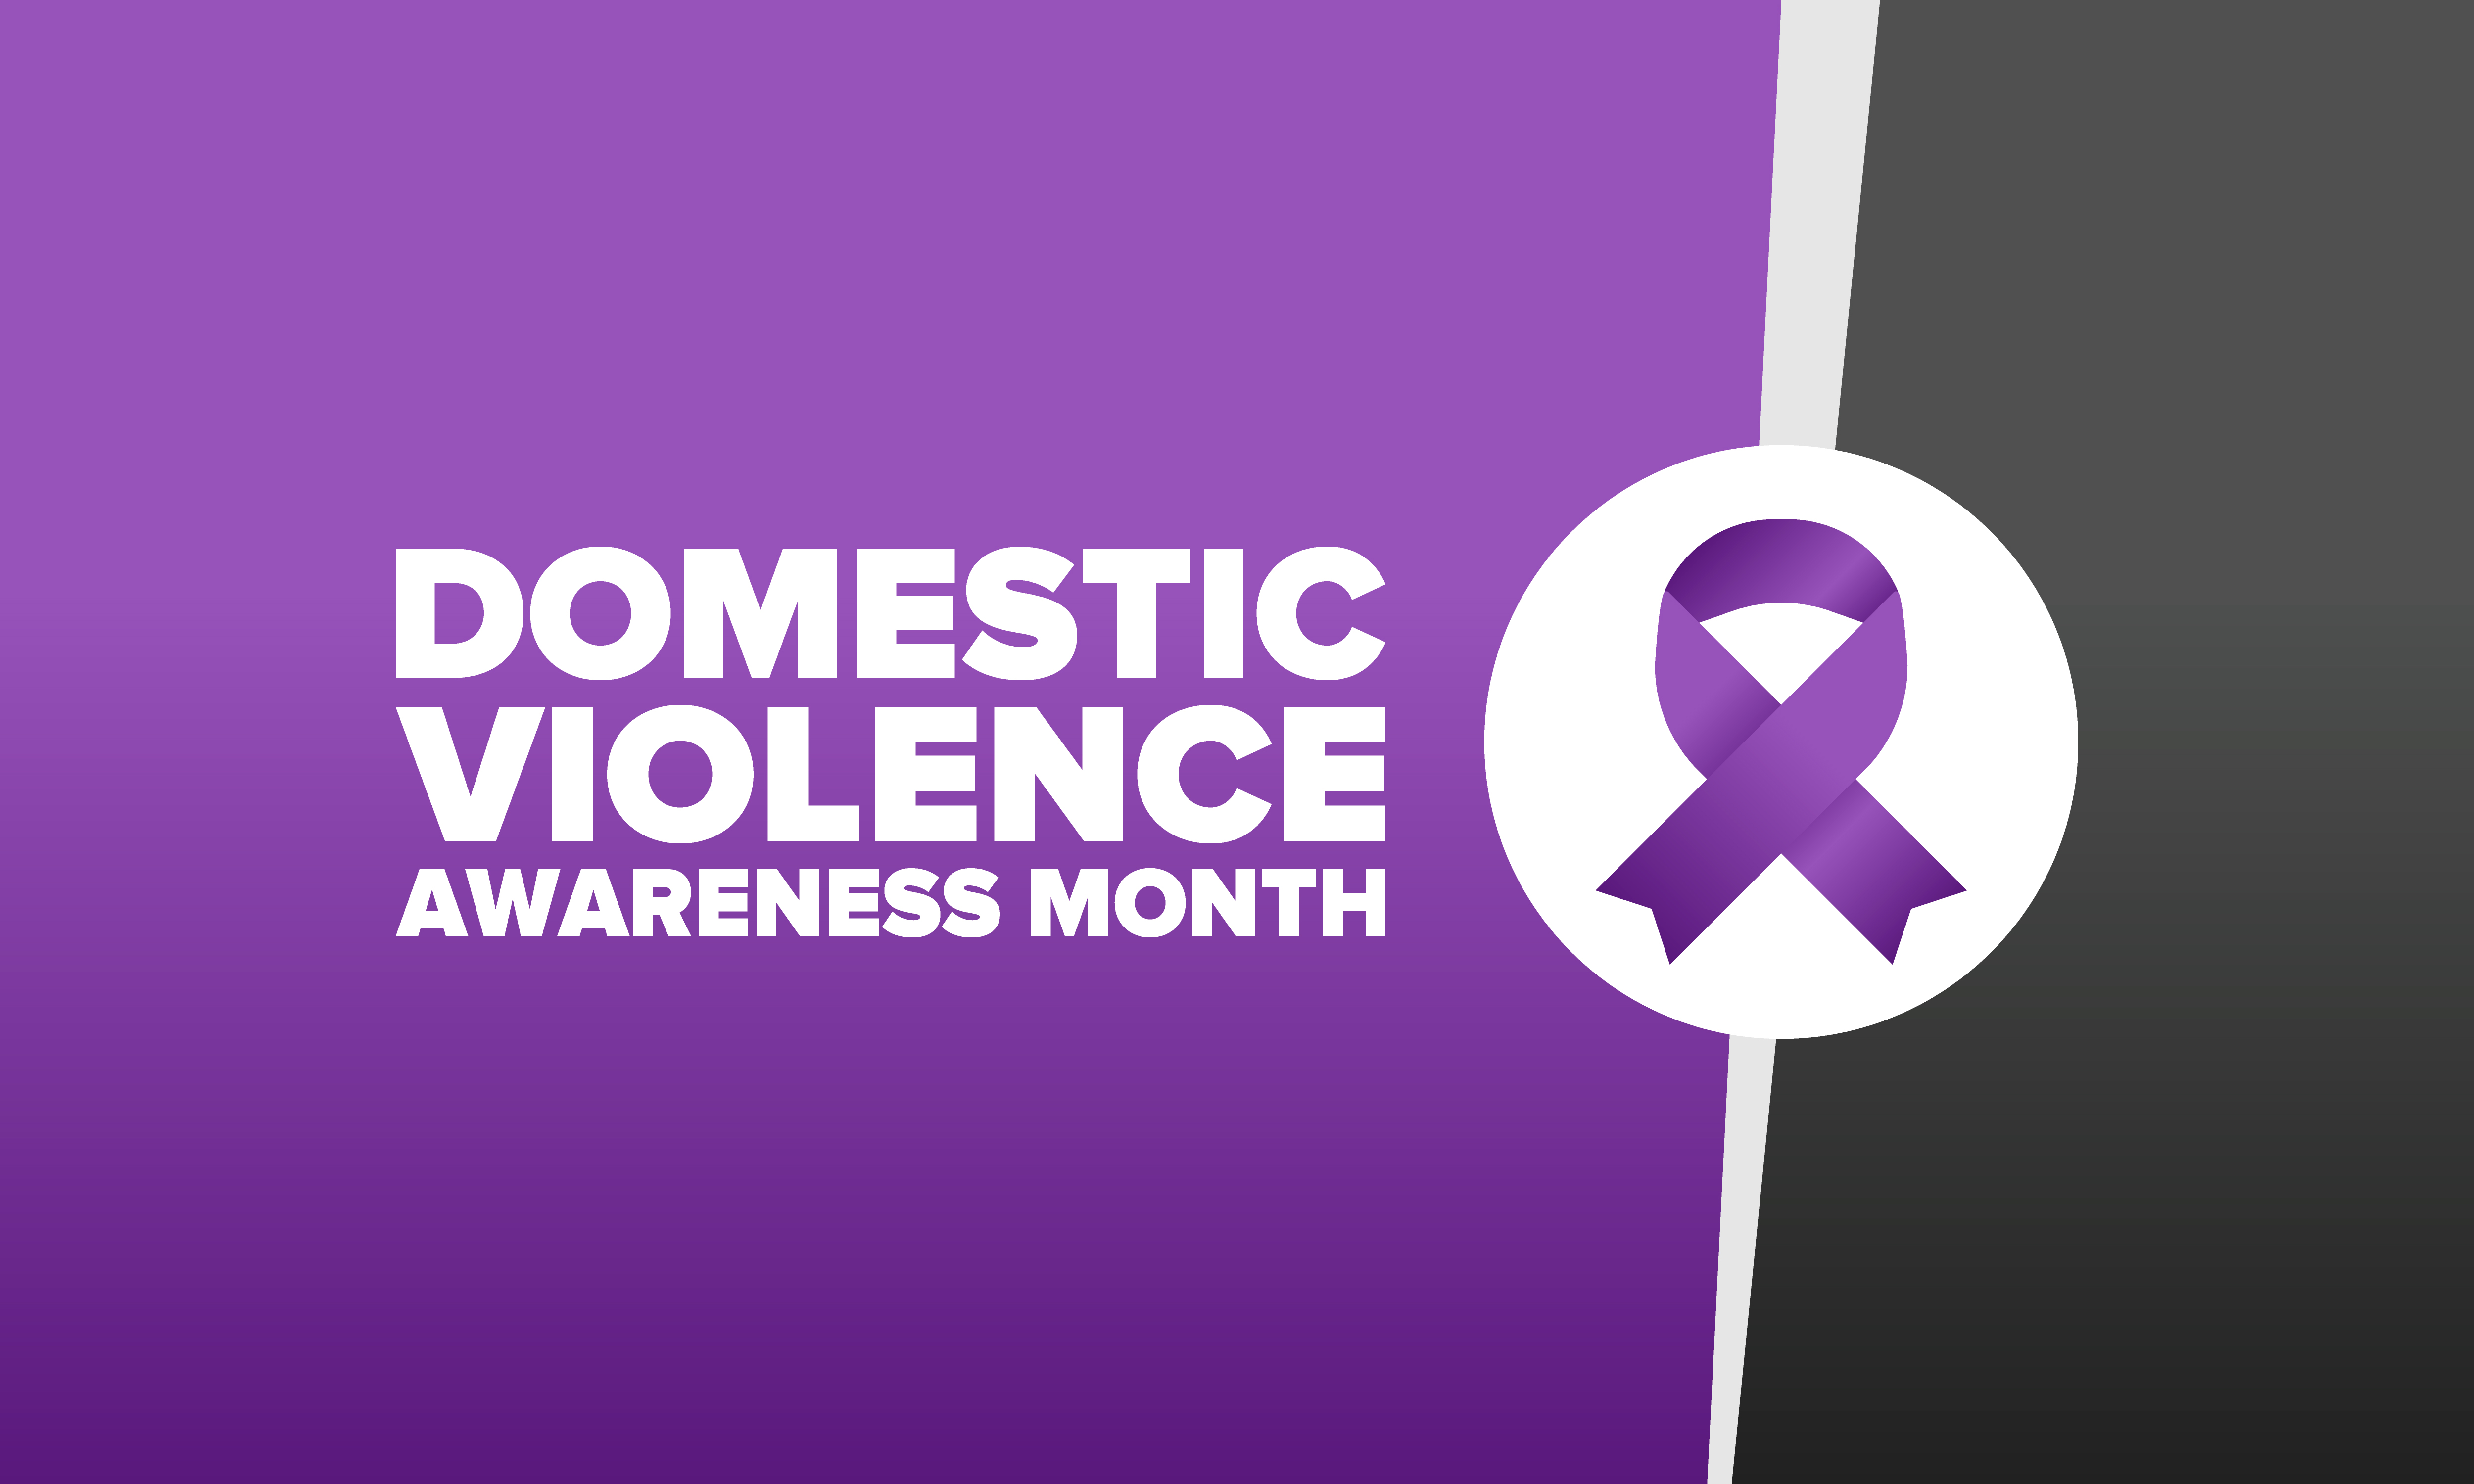 9. How to Create Nail Art Ribbons for Domestic Violence Awareness - wide 3